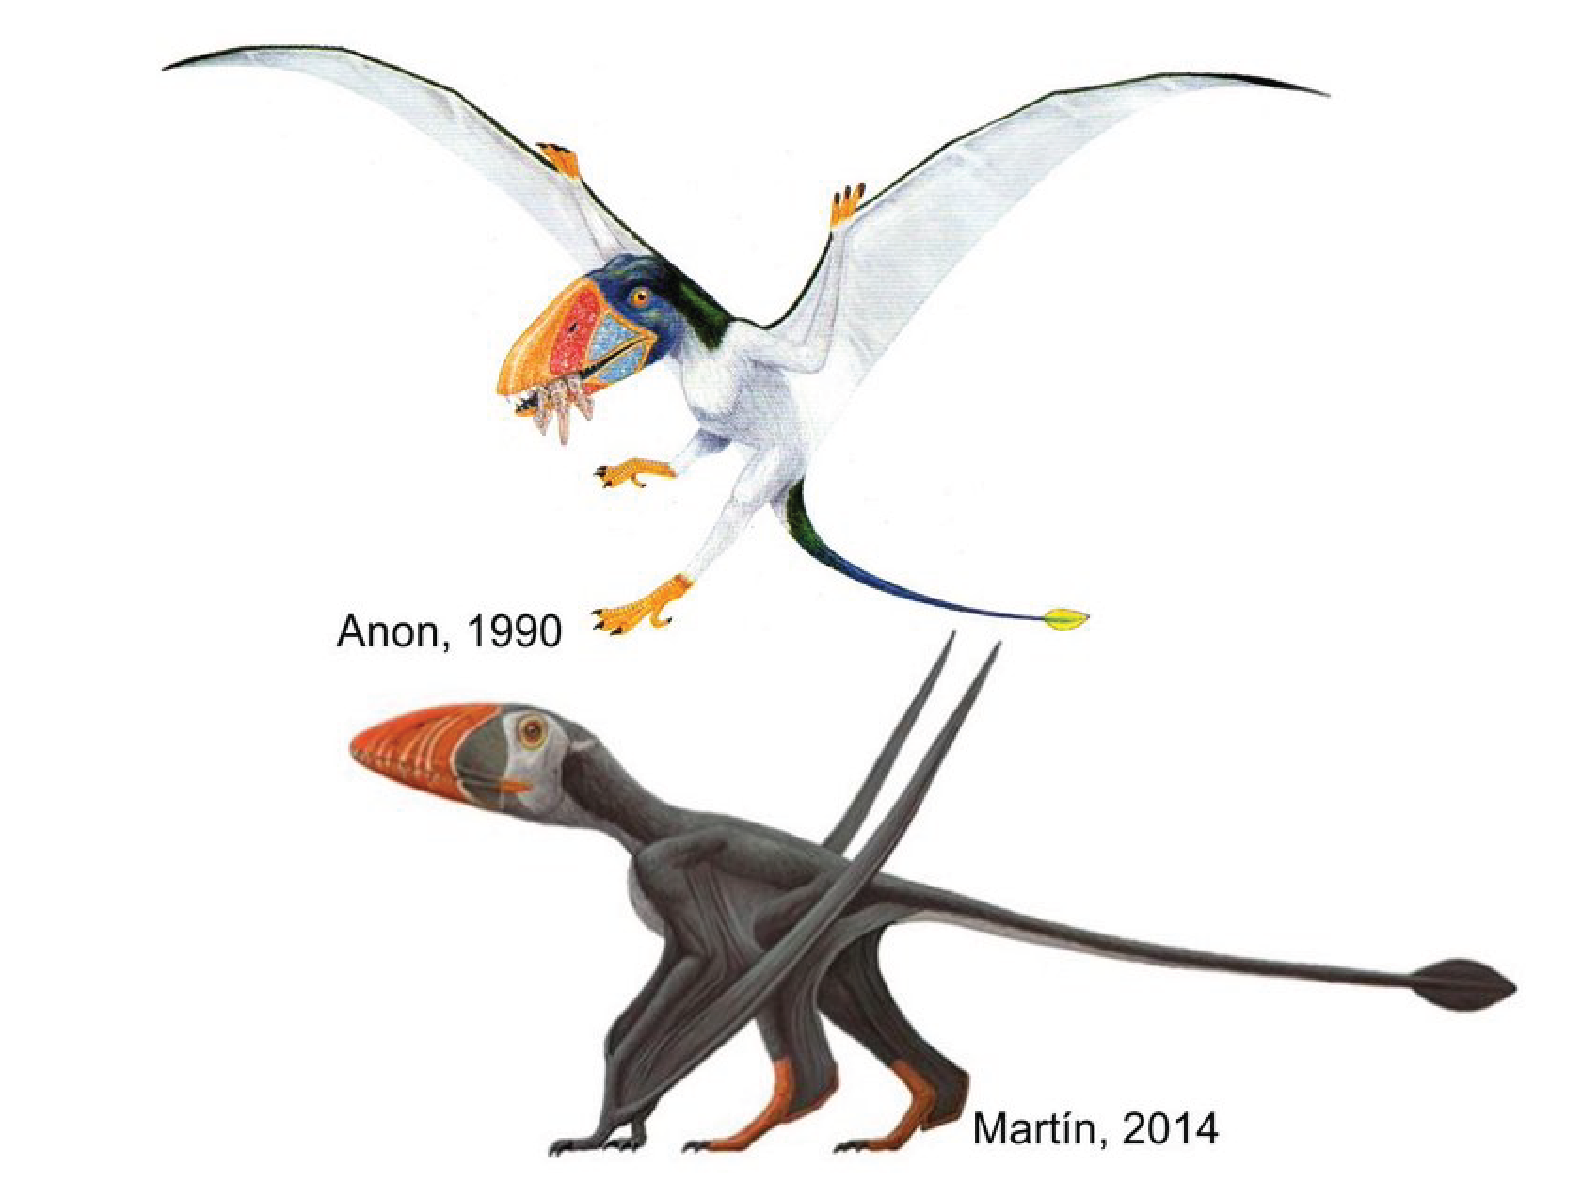 No, these pterosaurs were not Jurassic puffins, Science